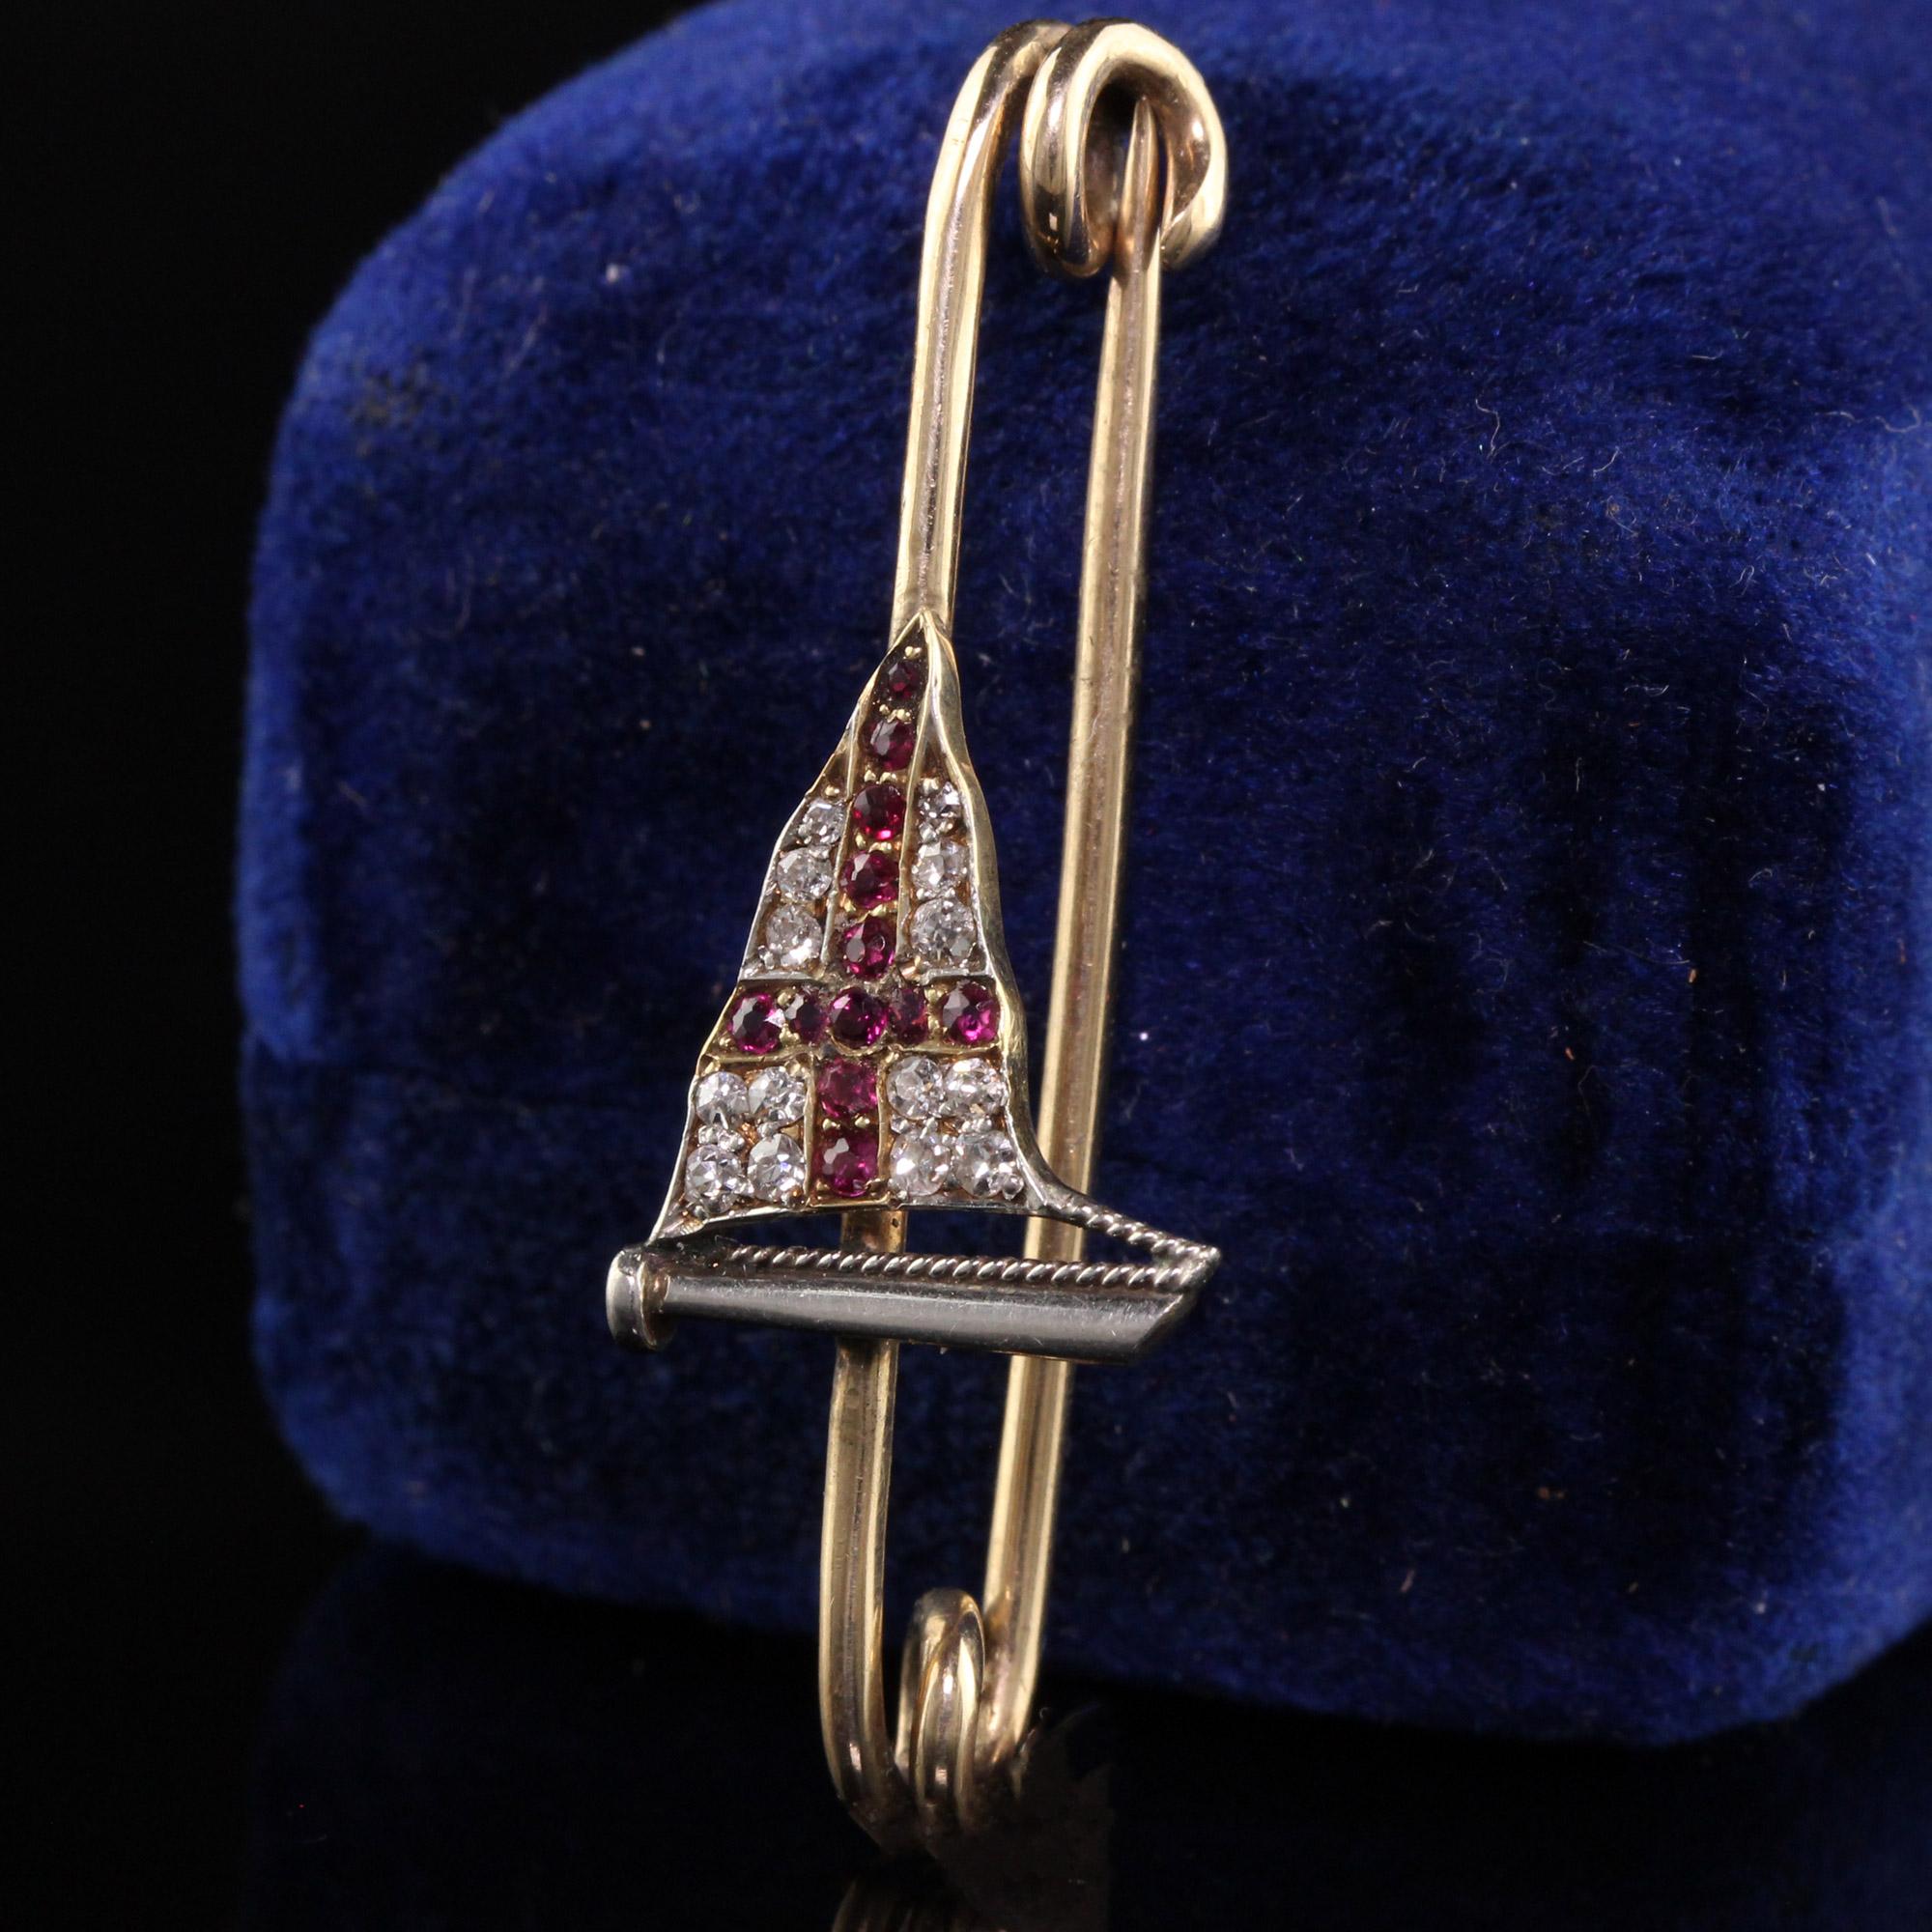 Beautiful Antique Art Deco 14K Yellow Gold Diamond and Ruby Sailboat/Flag Pin. This amazing pin has diamonds and burmese rubies set in the sail of the boat and is in amazing condition.

Item #P0126

Metal: 14K Yellow Gold

Weight: 2.5